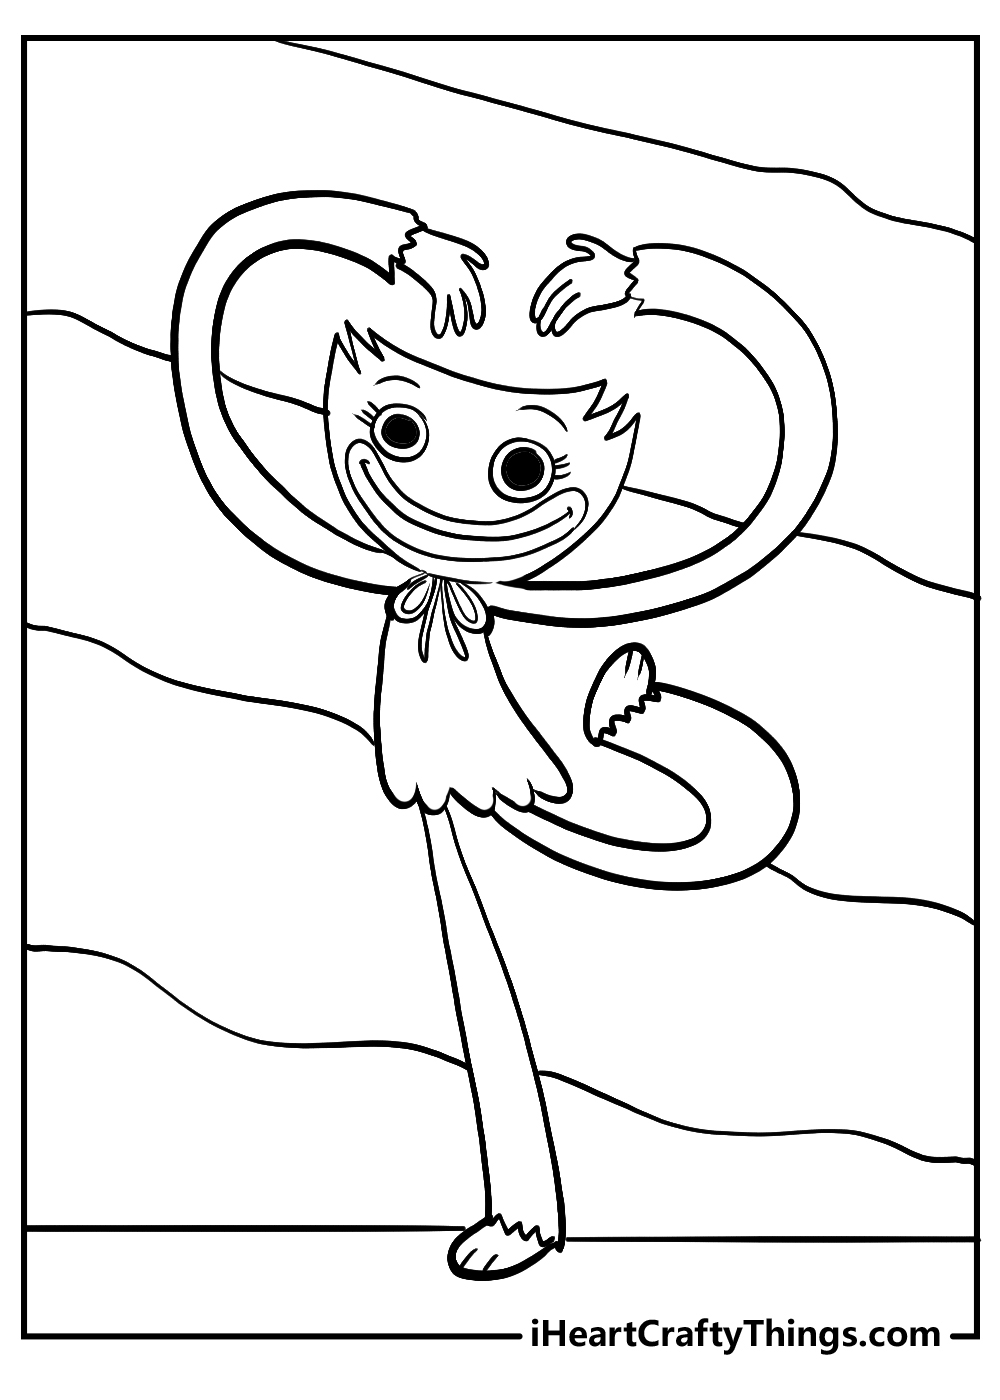 Mommy Long Legs from Poppy Playtime Coloring Pages - Get Coloring Pages